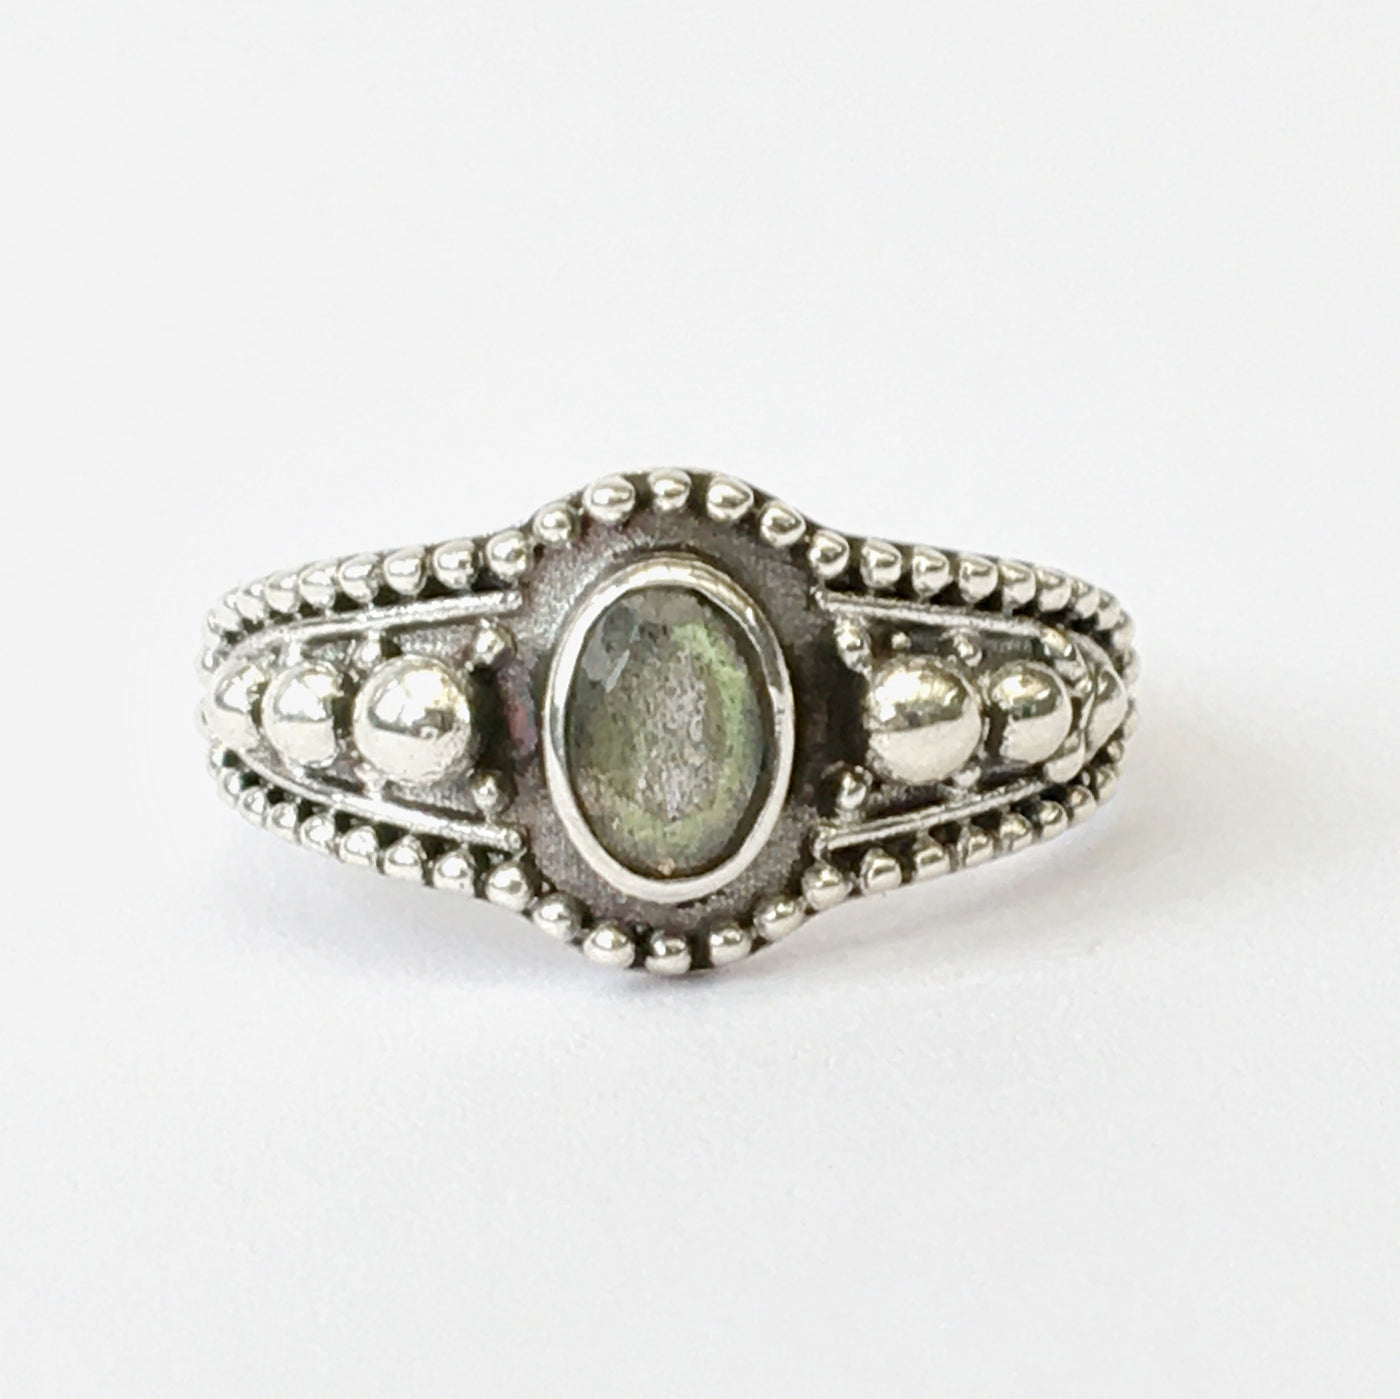 Silver Sewetta Ring - ForageDesign